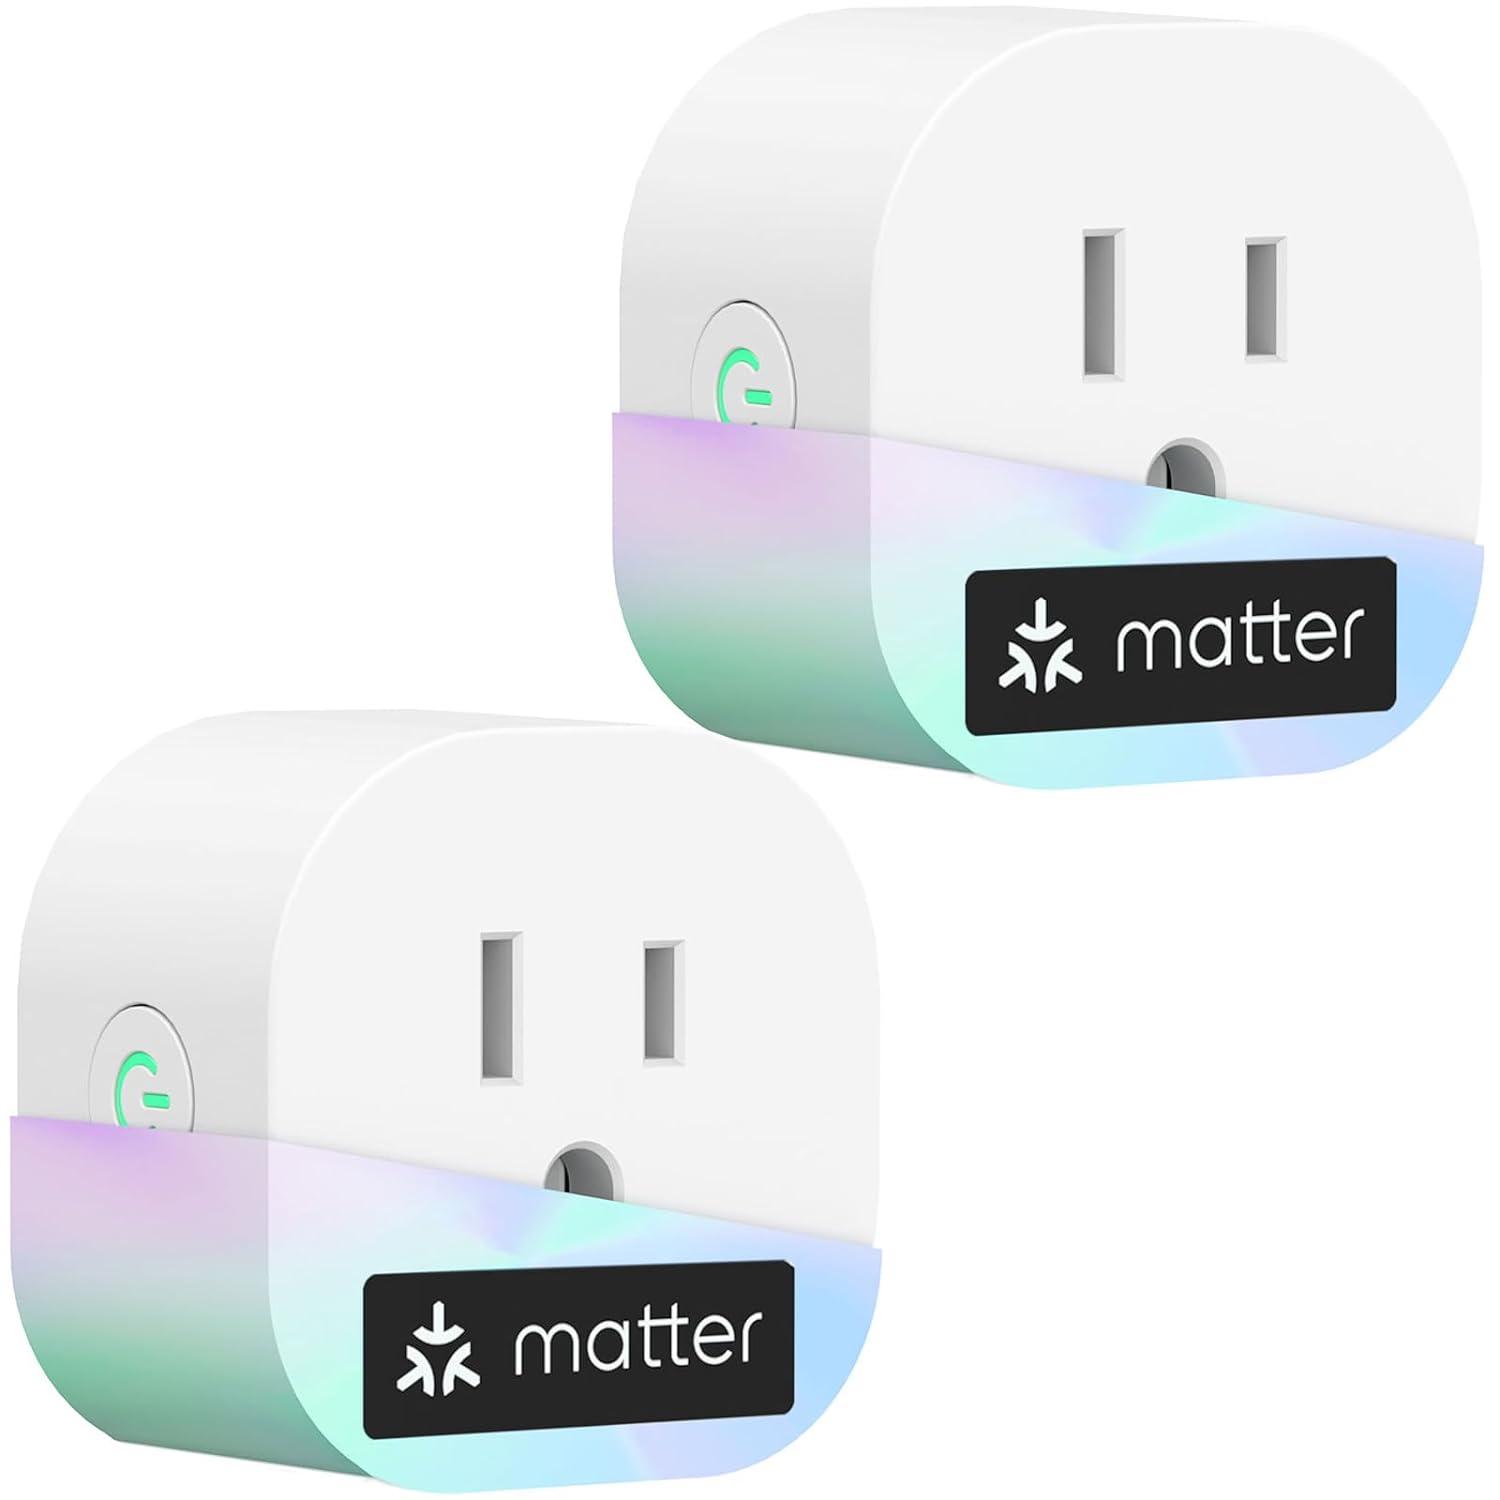 Meross MSS115 Smart Plug Mini: Compact, Voice-Controlled, and Matter-Certified for Your Smart Home